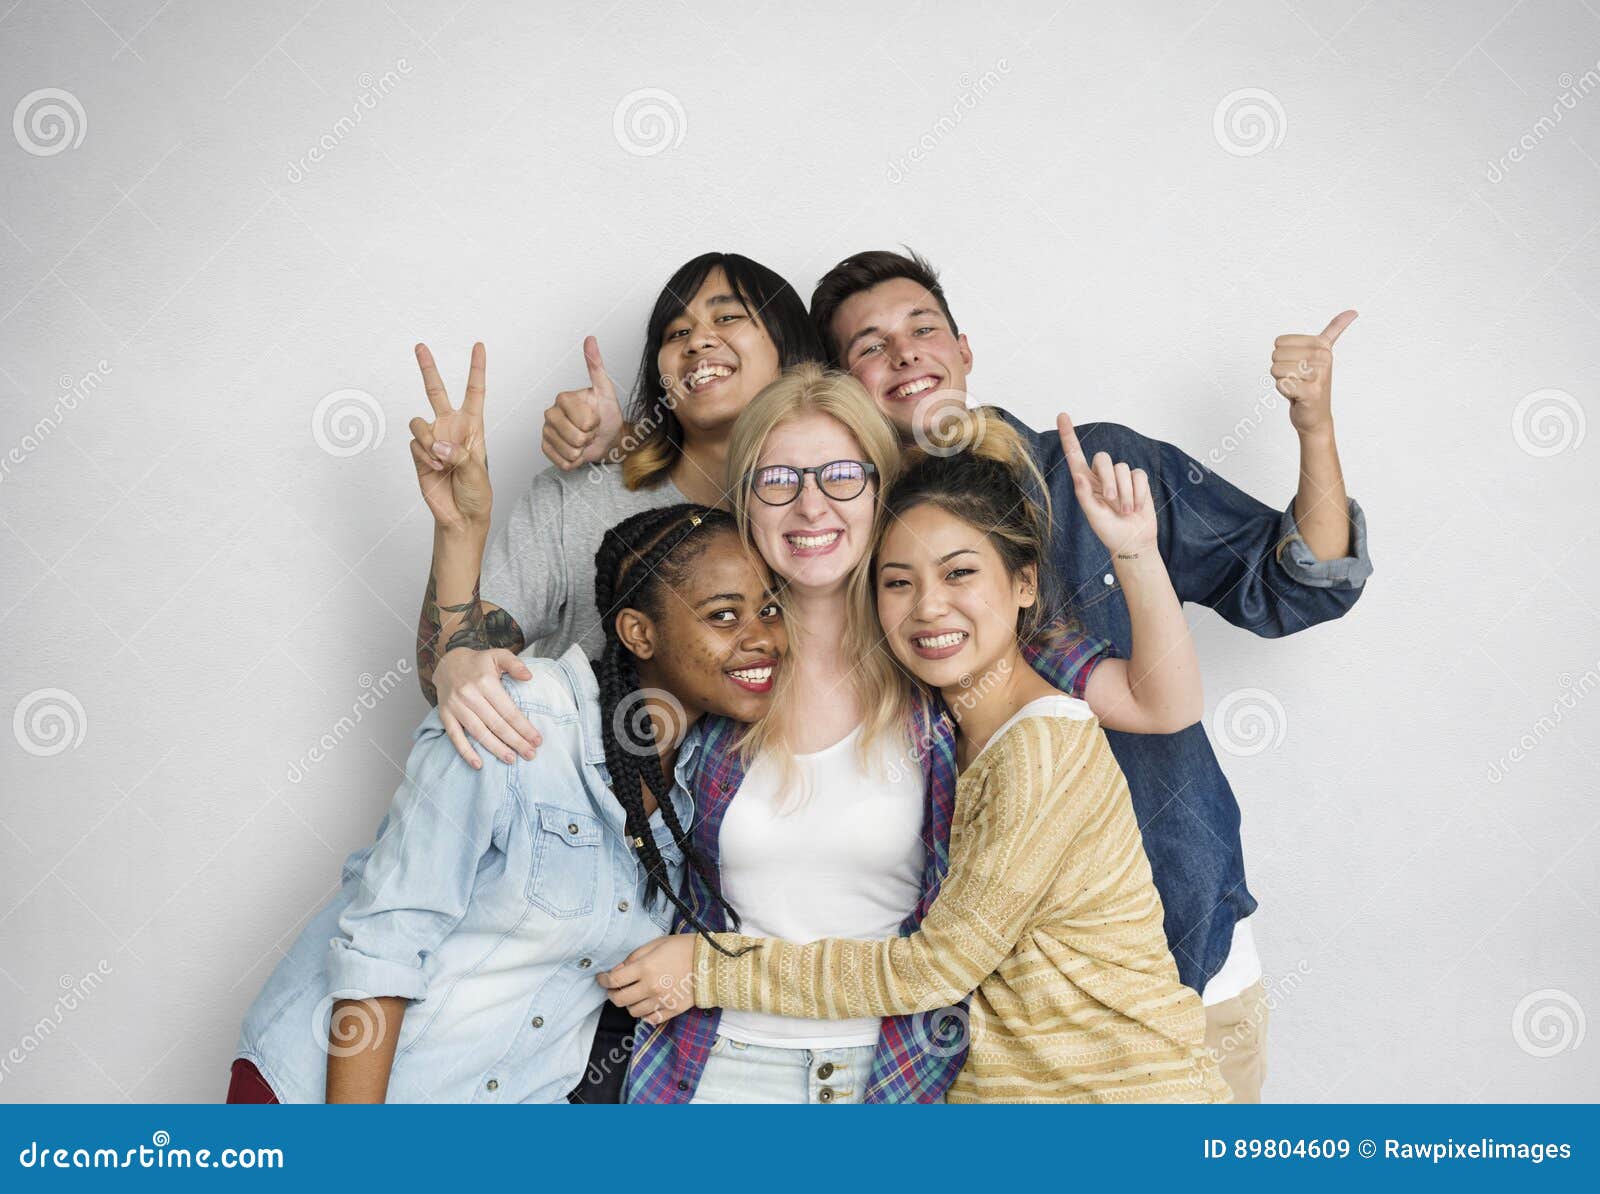 diversity students friends happiness pose concept